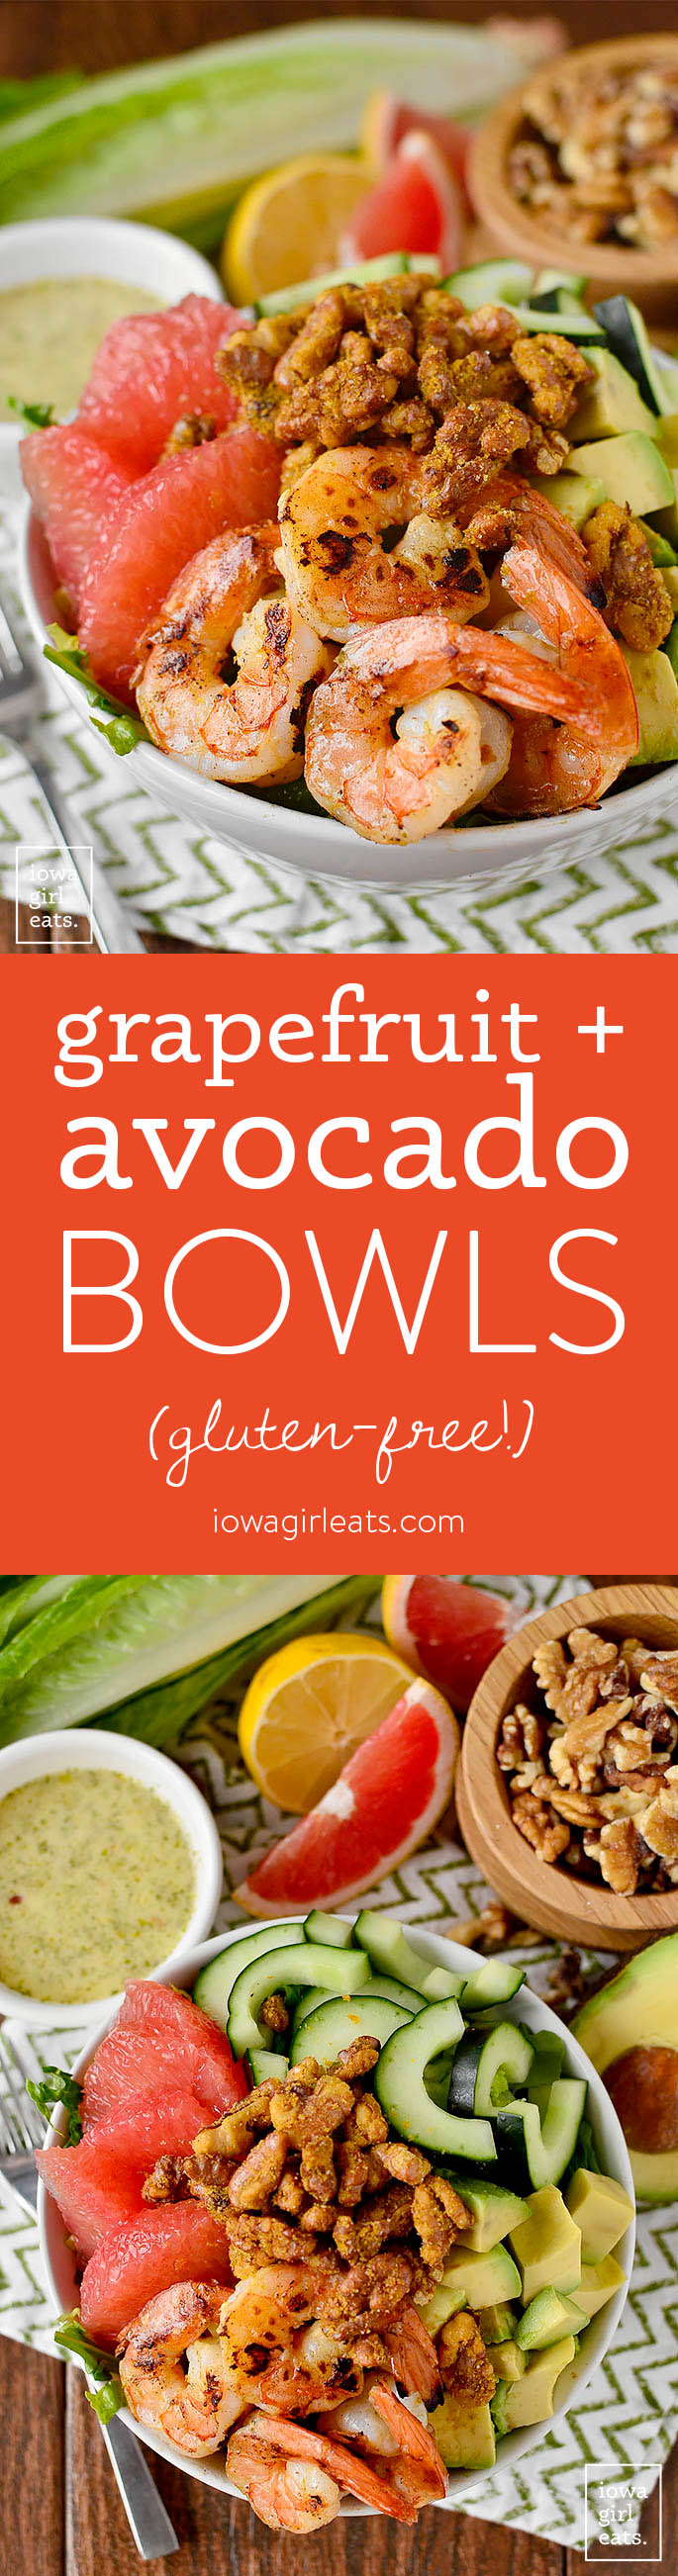 Grapefruit + Avocado Bowls are fresh and healthy, with a delicious and addicting, easy walnut topping! | iowagirleats.com